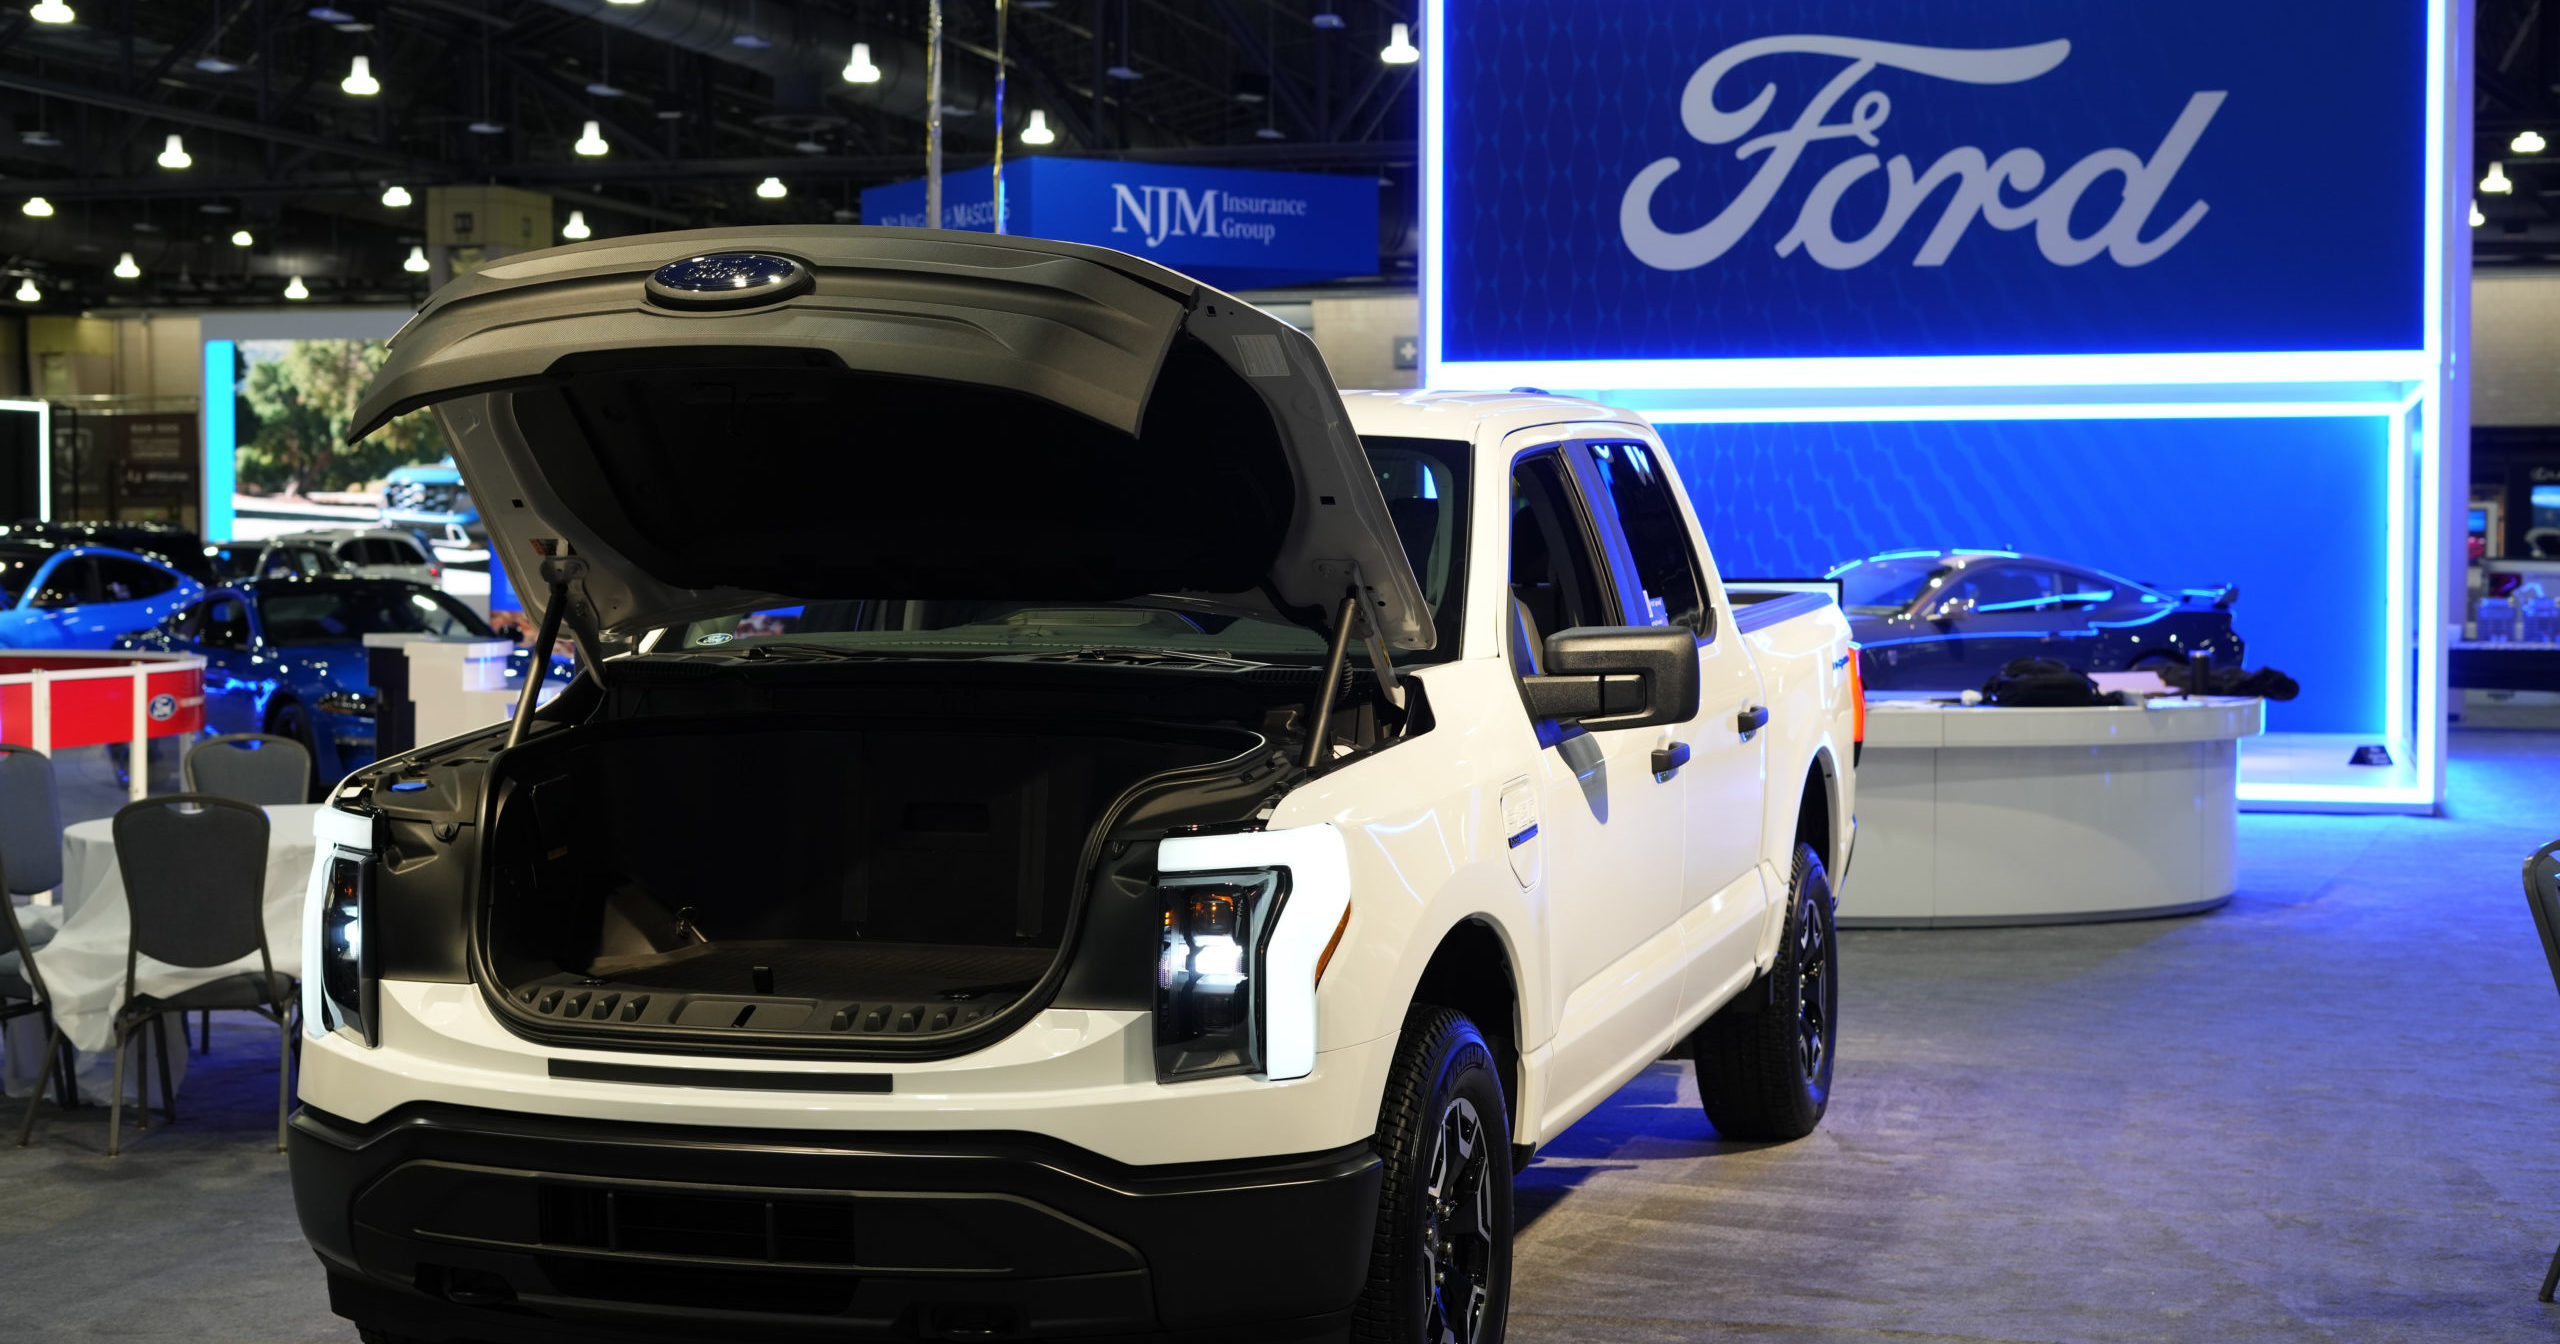 The Ford F-150 Lightning is displayed at the Philadelphia Auto Show on Jan. 27.